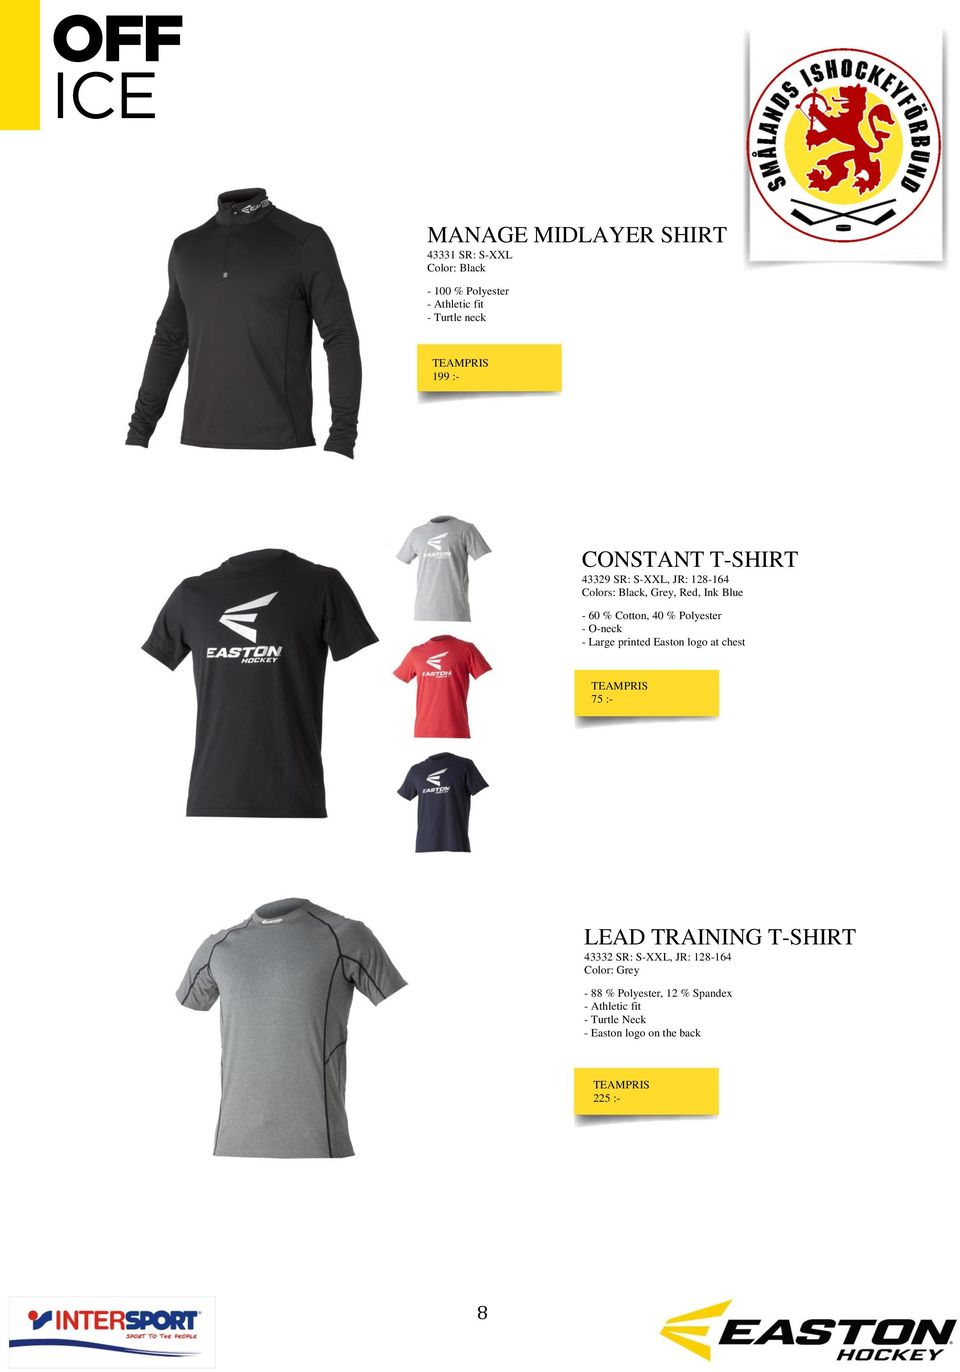 Large printed Easton logo at chest 75 :- LEAD TRAINING T-SHIRT 43332 SR: S-XXL, JR: 128-164 Color: